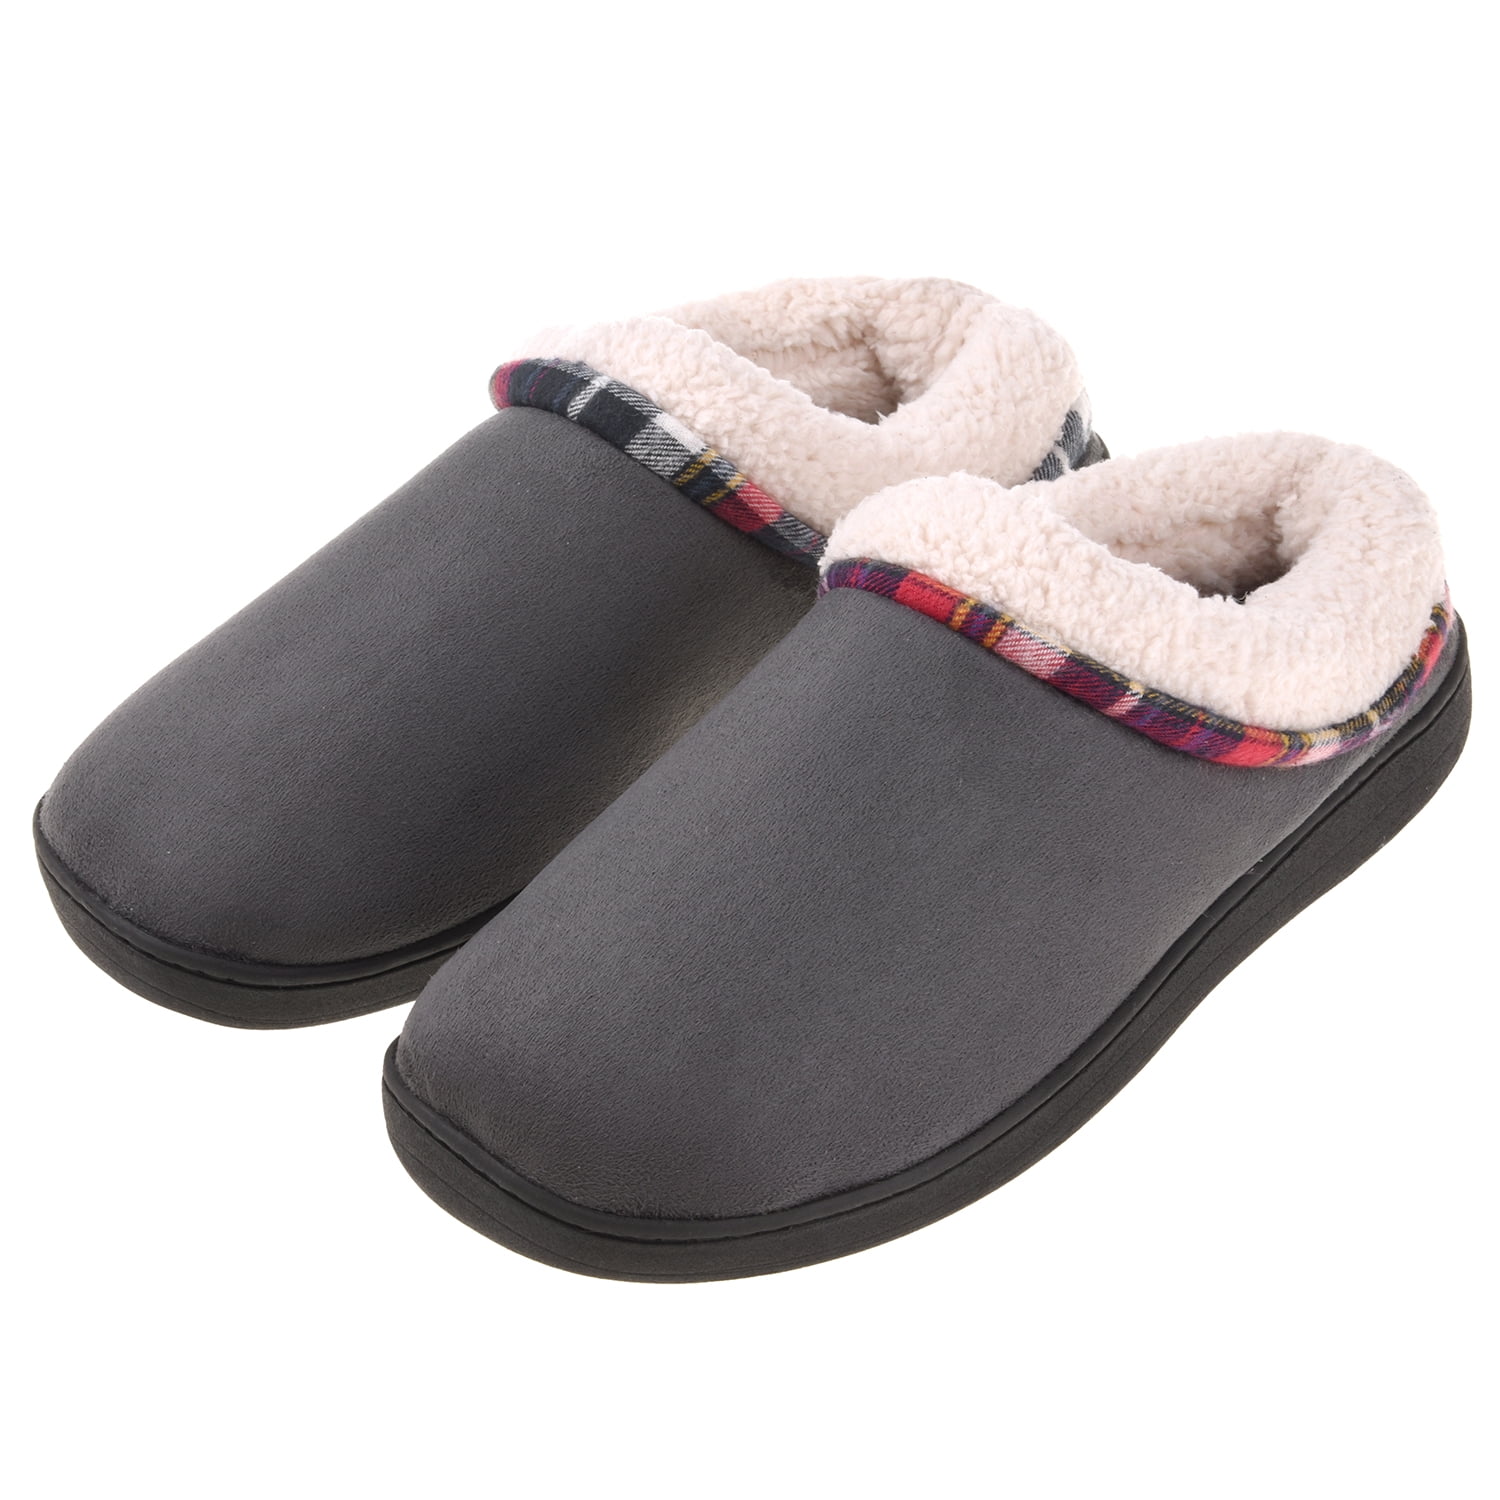 MENS GREY SLIPPERS COSY MEMORY FOAM FAUX FUR LINED HARD SOLE GENTS MULES SIZE